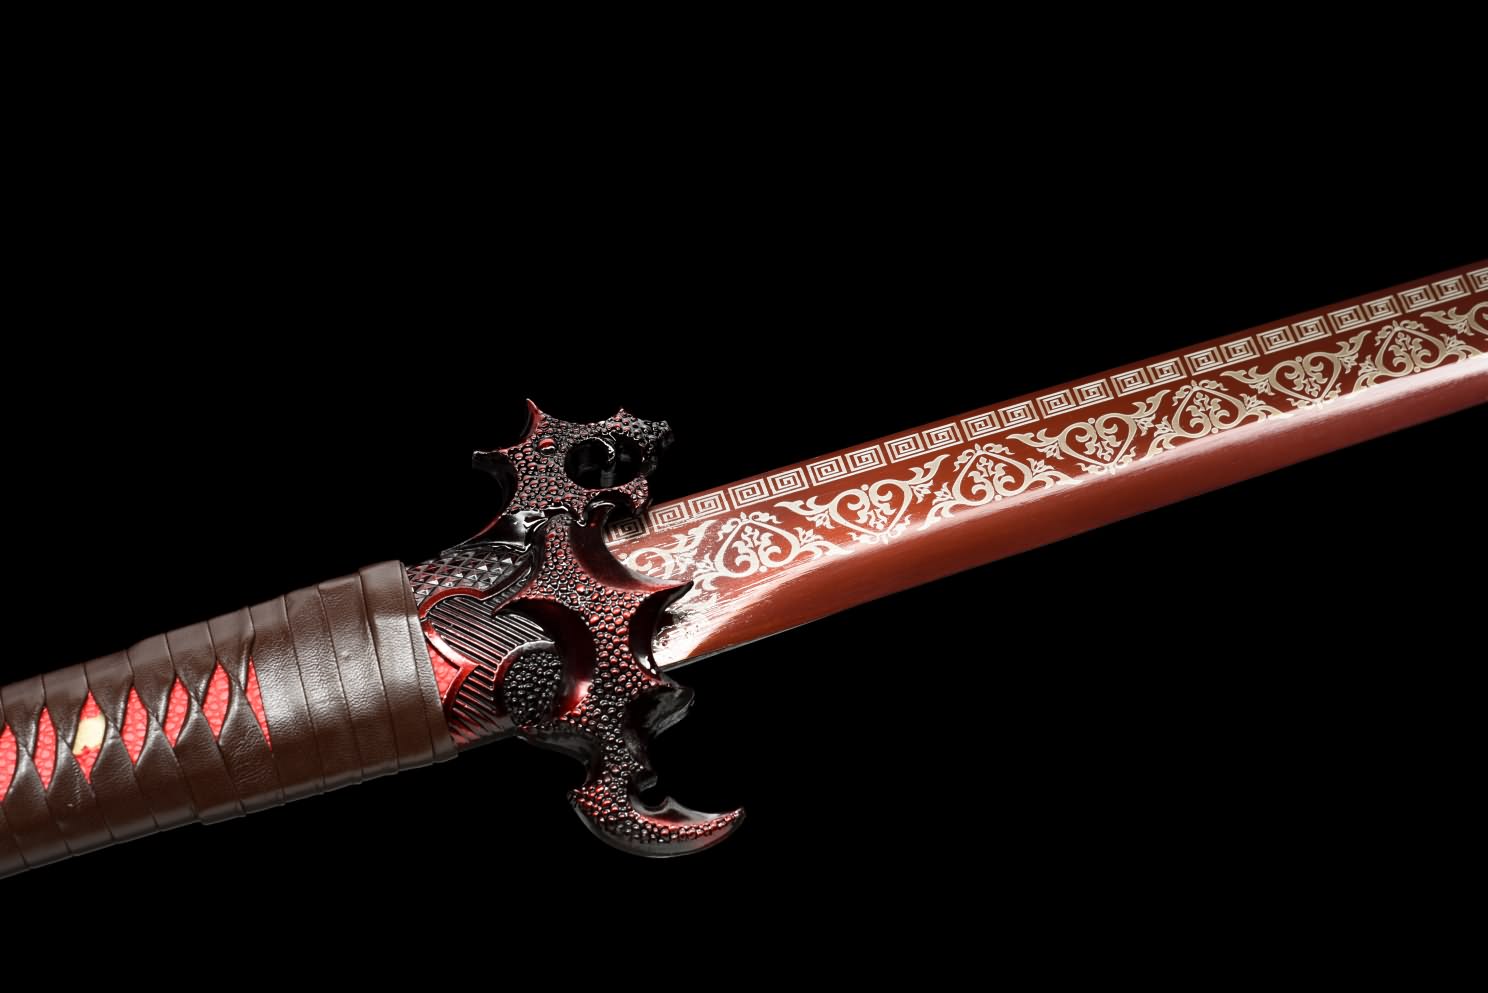 LOONGSWORD Red Dragon Tang dao Sword,Battle Ready Hand Forged High Carbon Steel Etched Blade